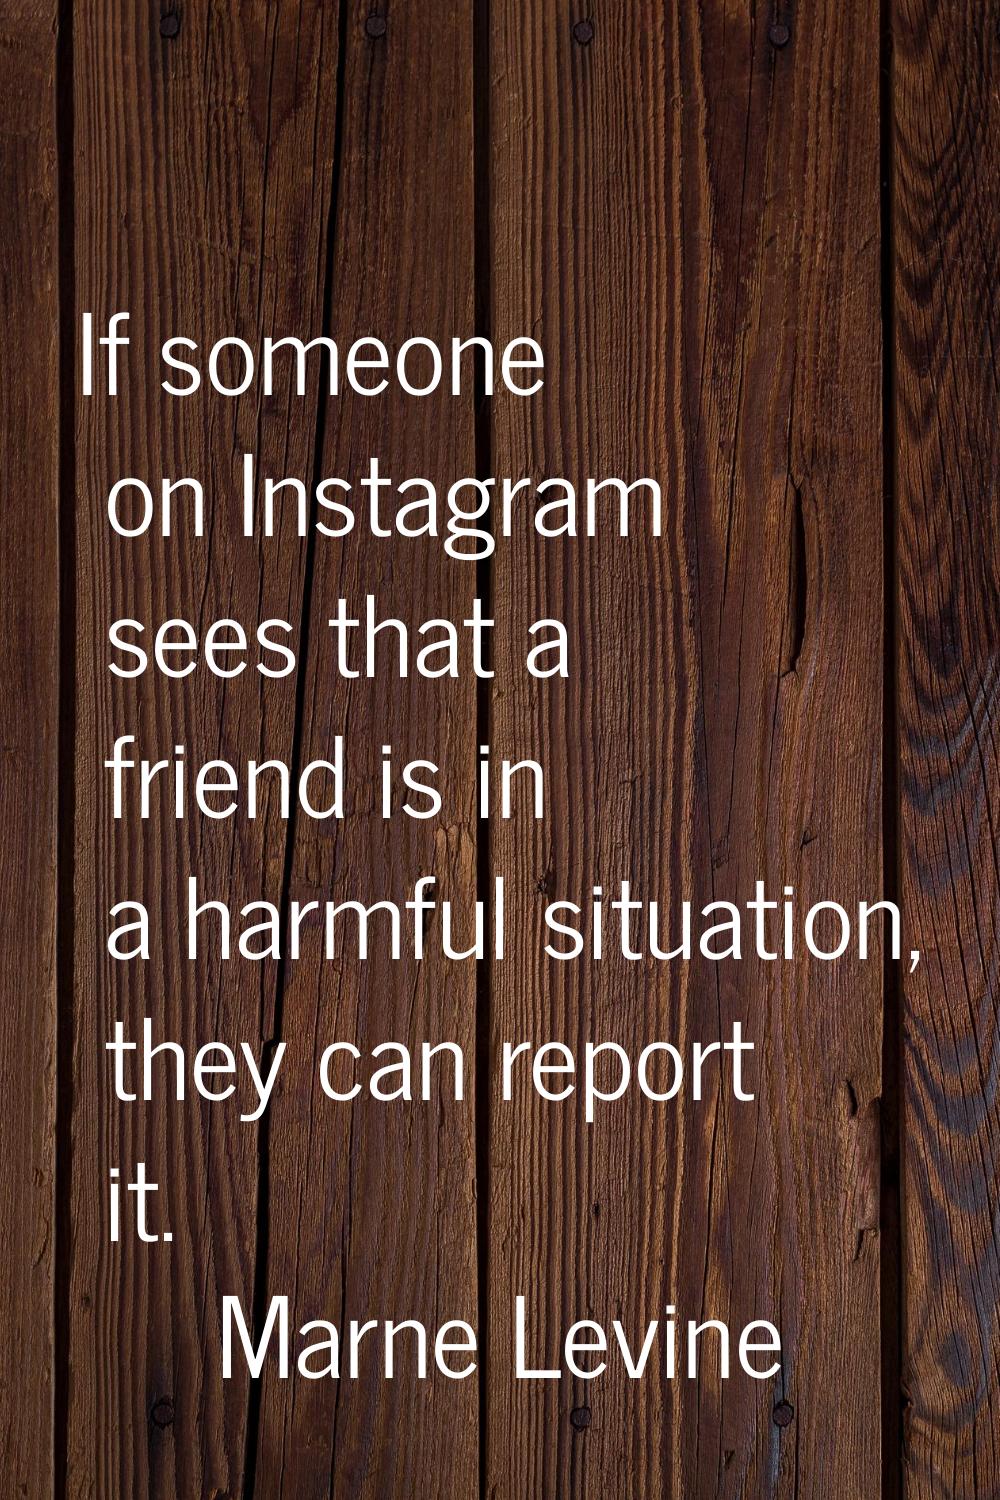 If someone on Instagram sees that a friend is in a harmful situation, they can report it.